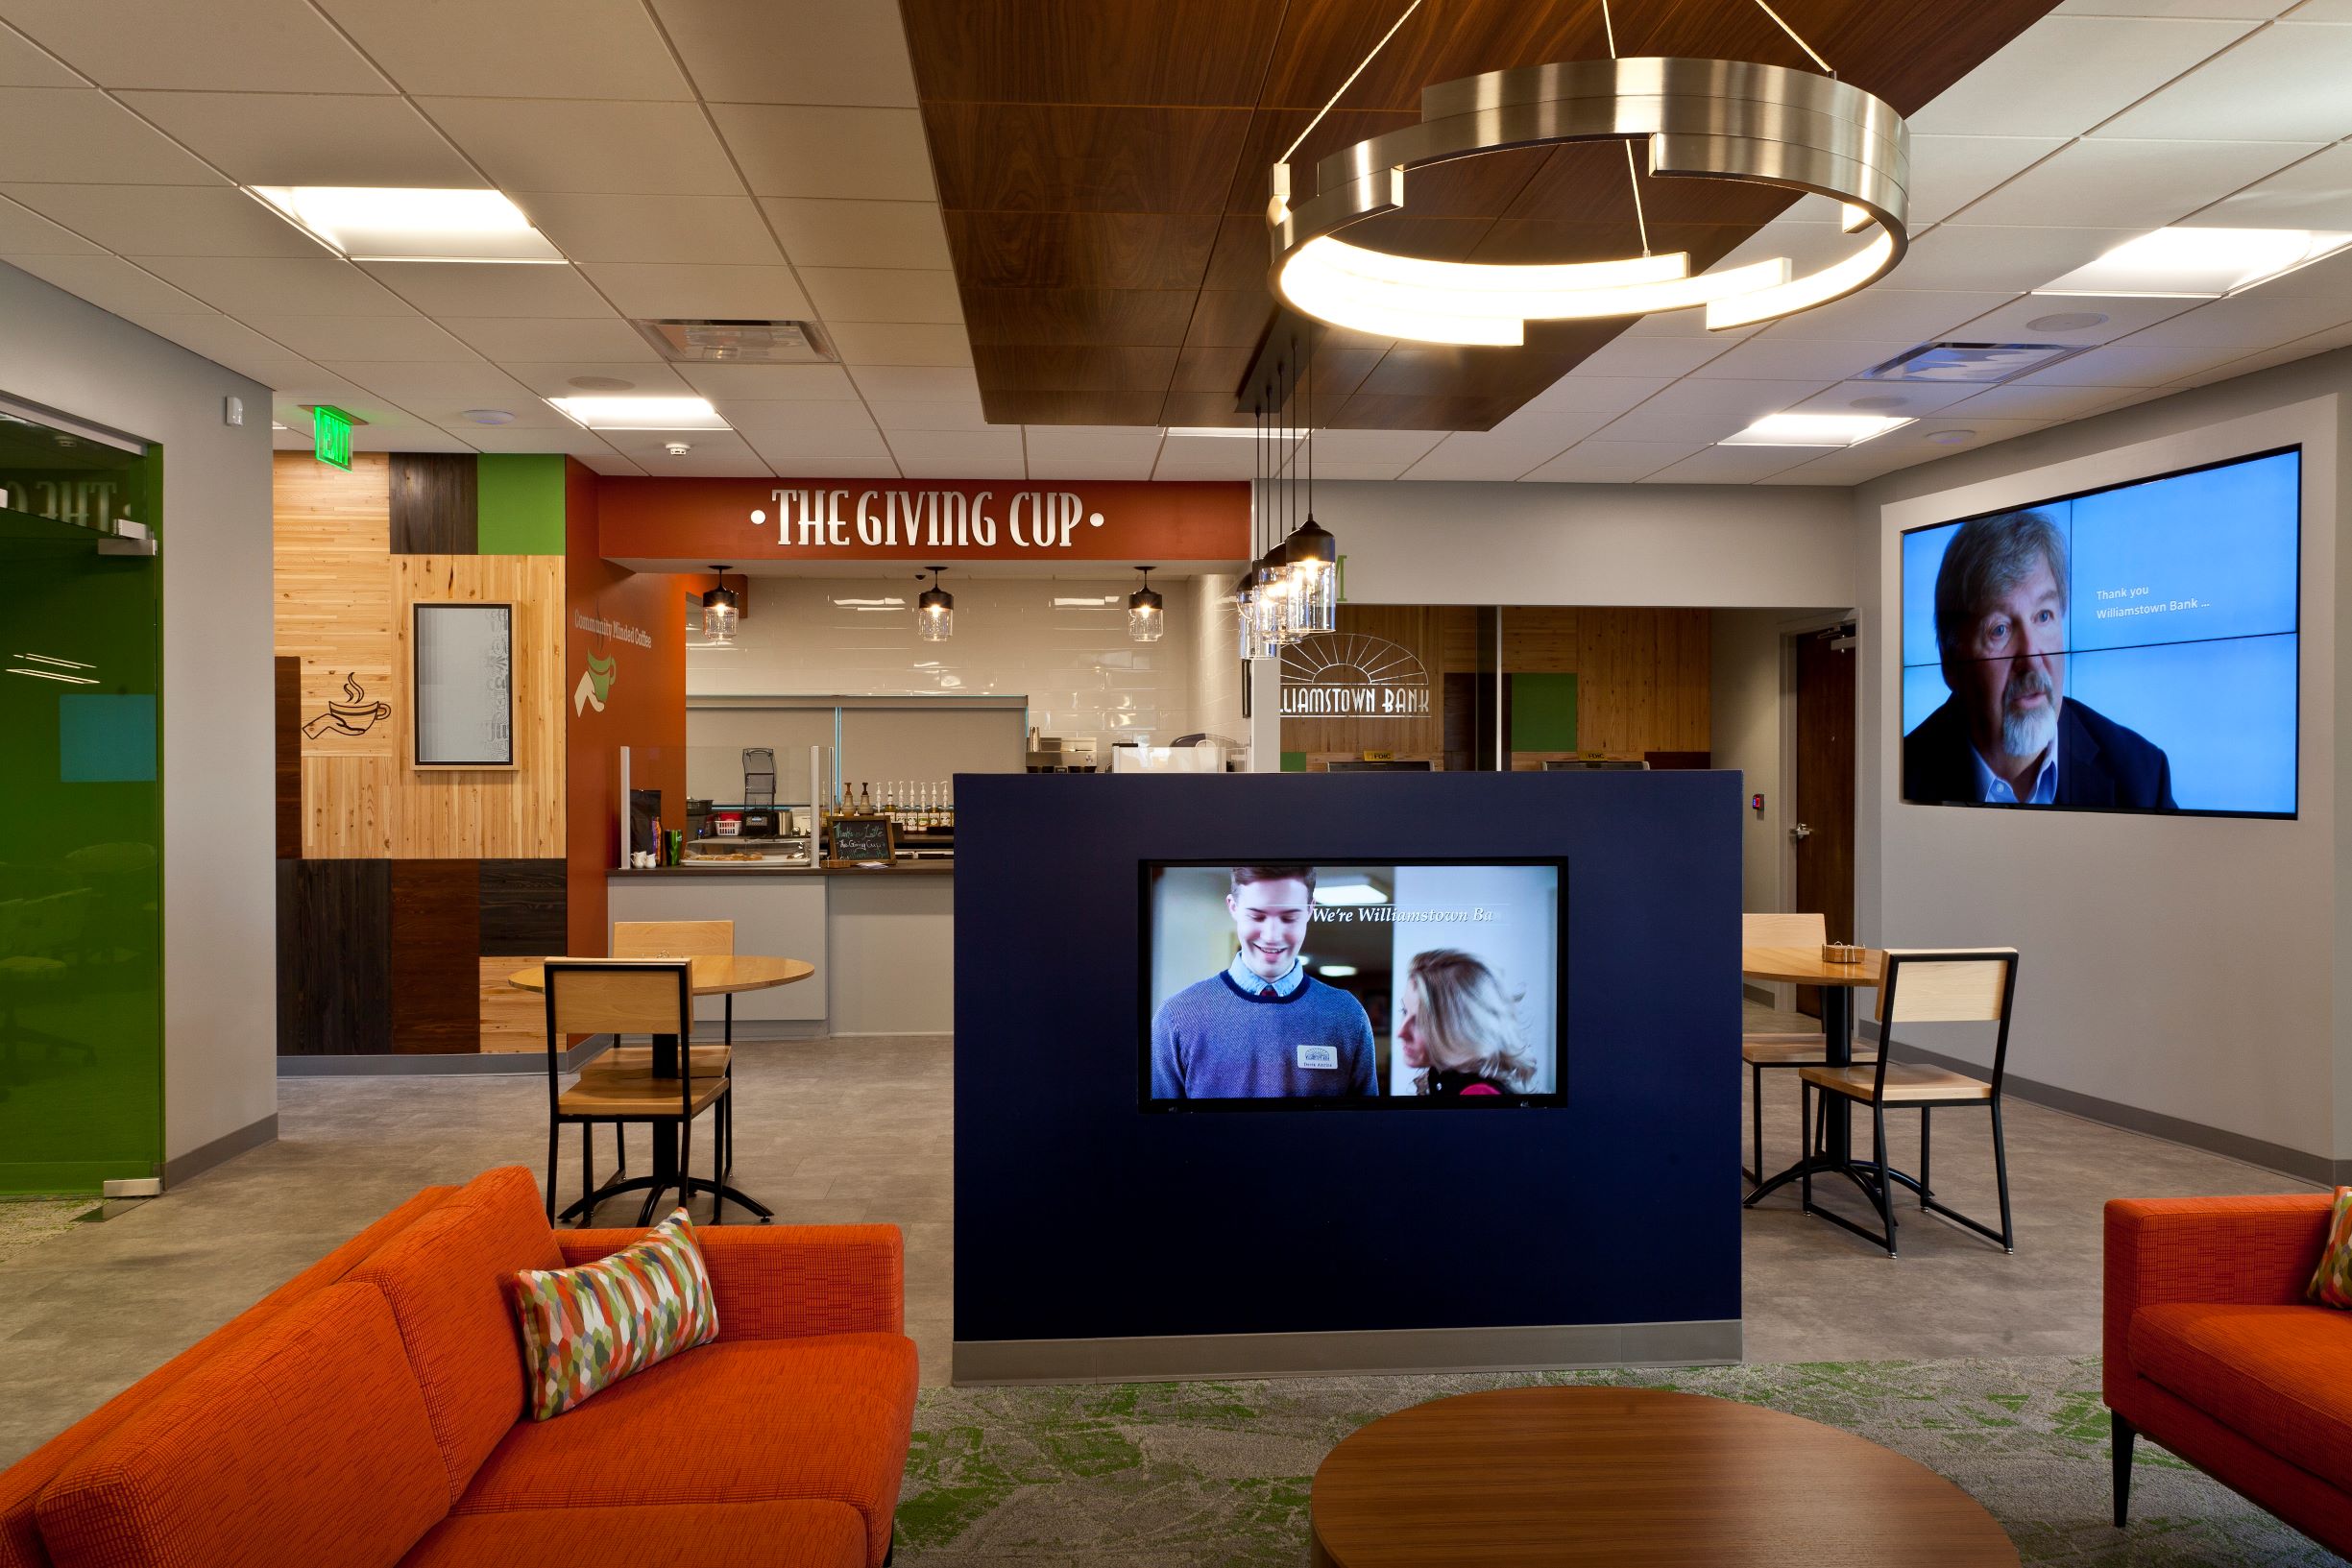 Customer lounge filled with technology at Williamstown Bank